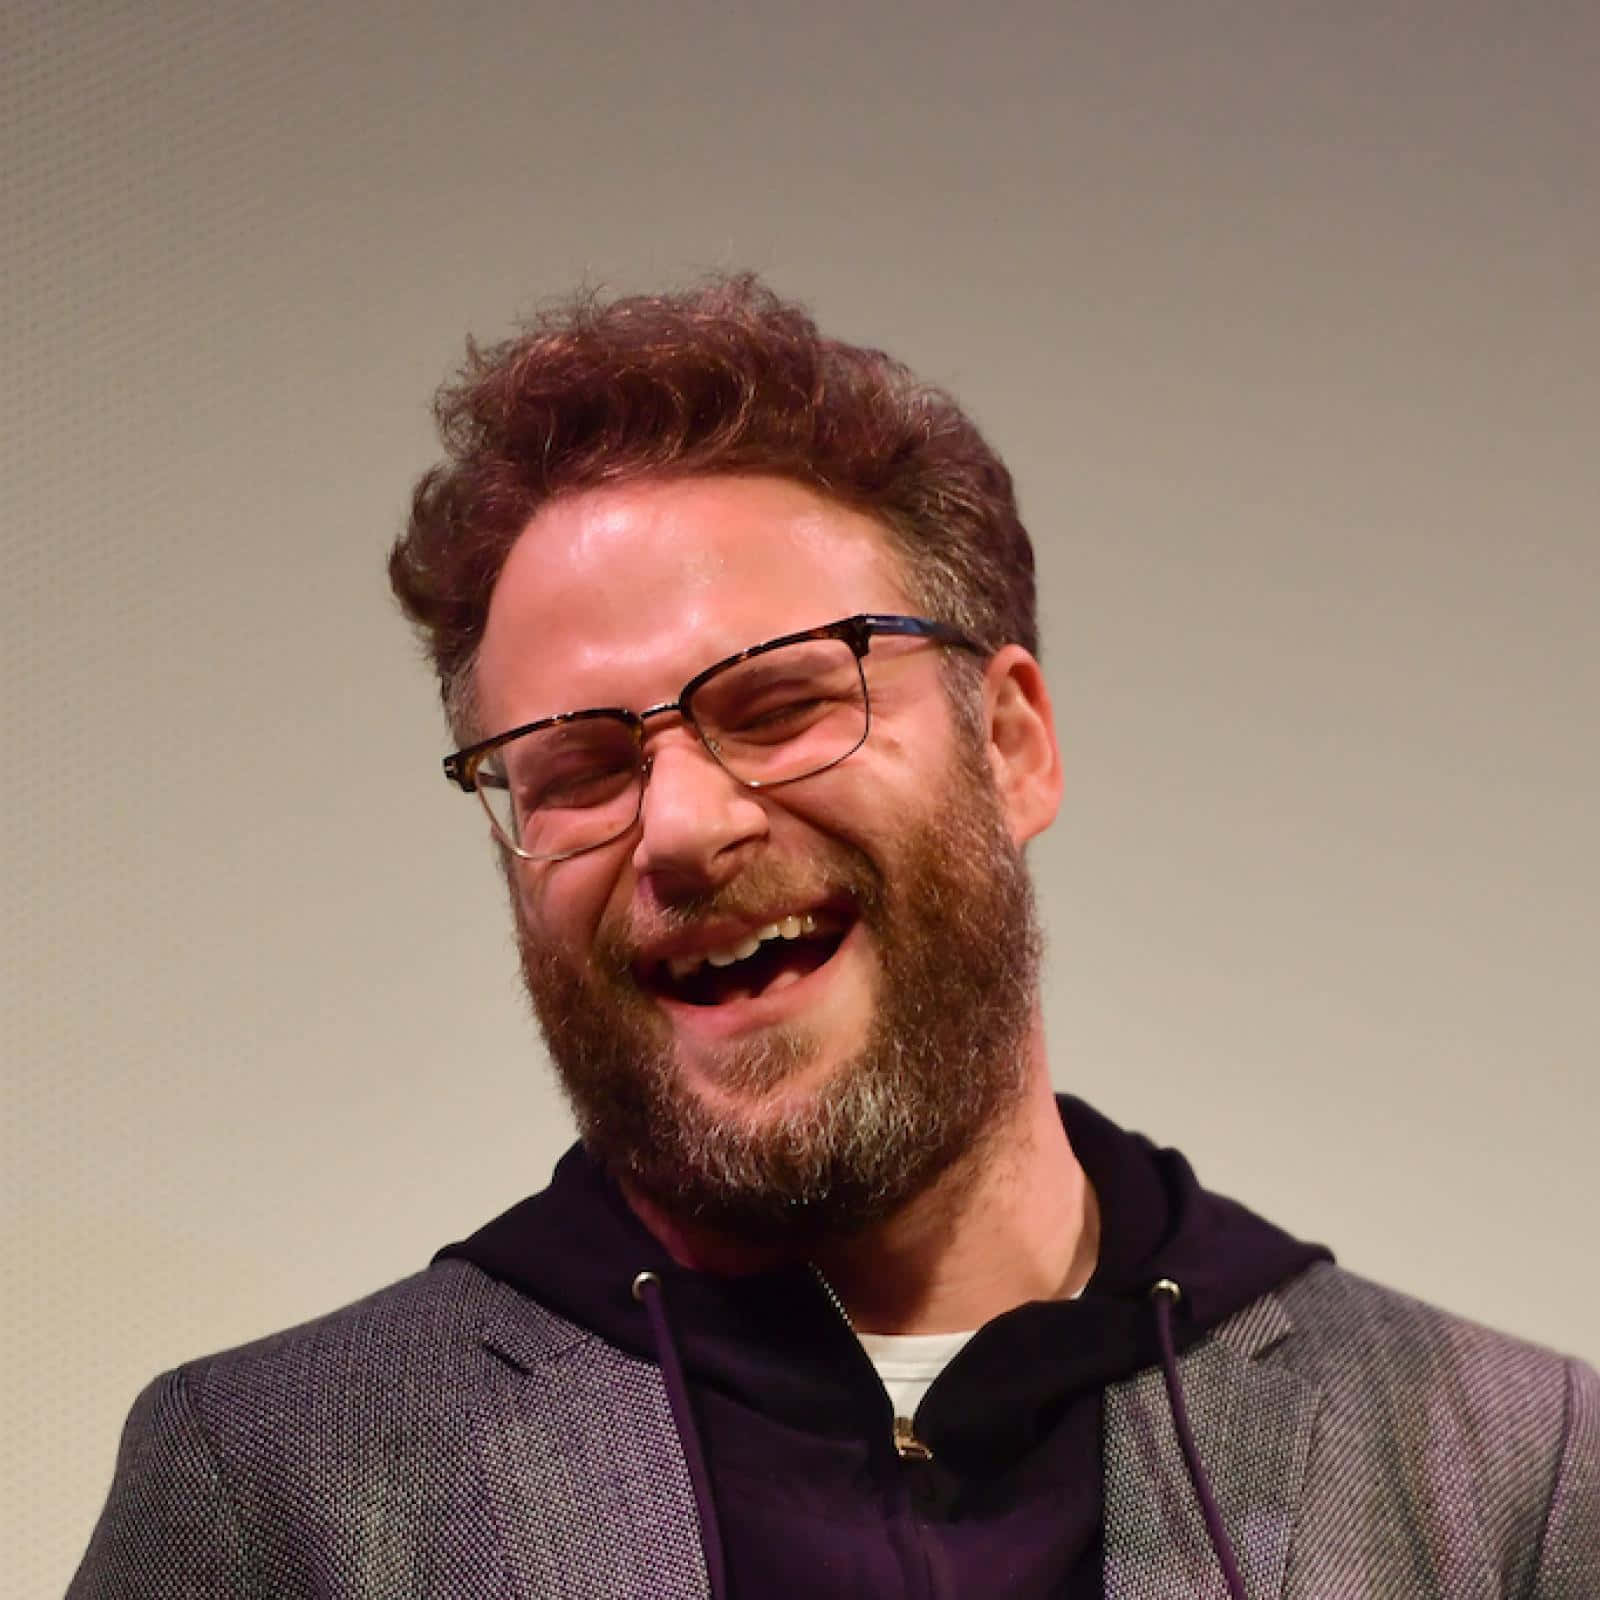 Comedic Powerhouse Seth Rogen Smiling Candidly Wallpaper